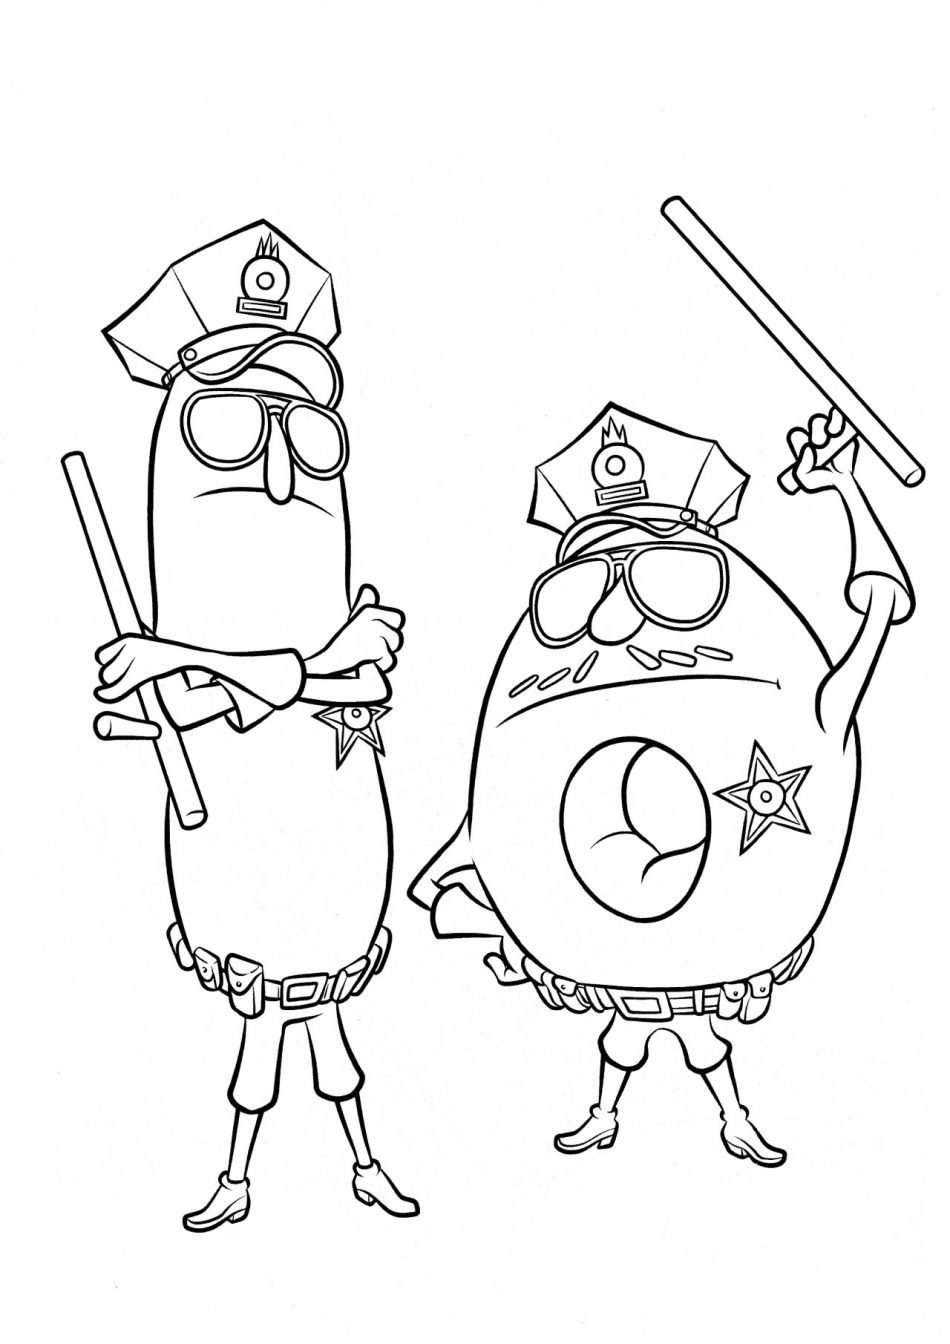 wyntchell and duncan donut police officers coloring e1580671272834